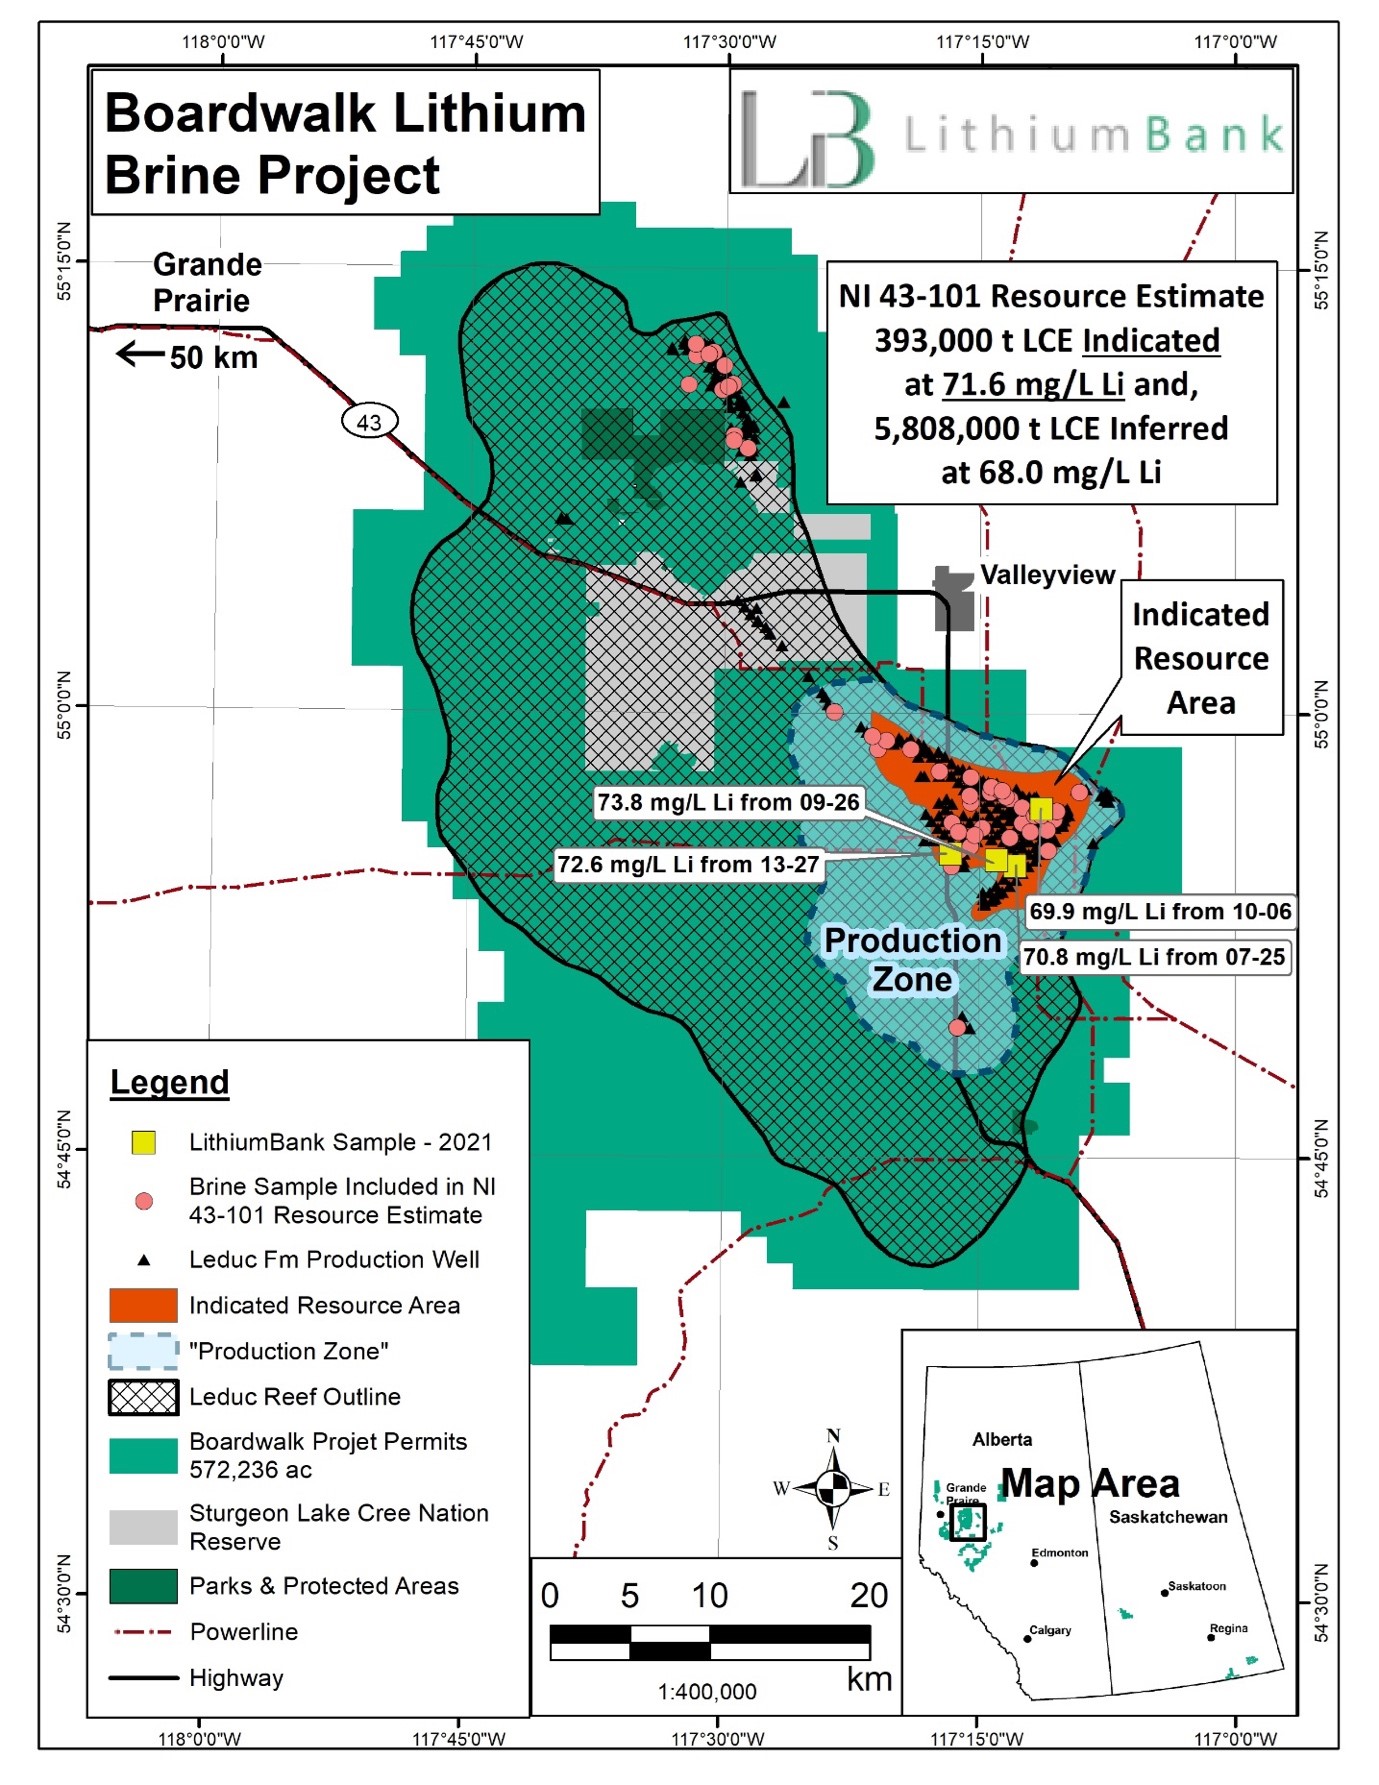 Boardwalk lithium brine project showing the ‘Production Zone’.